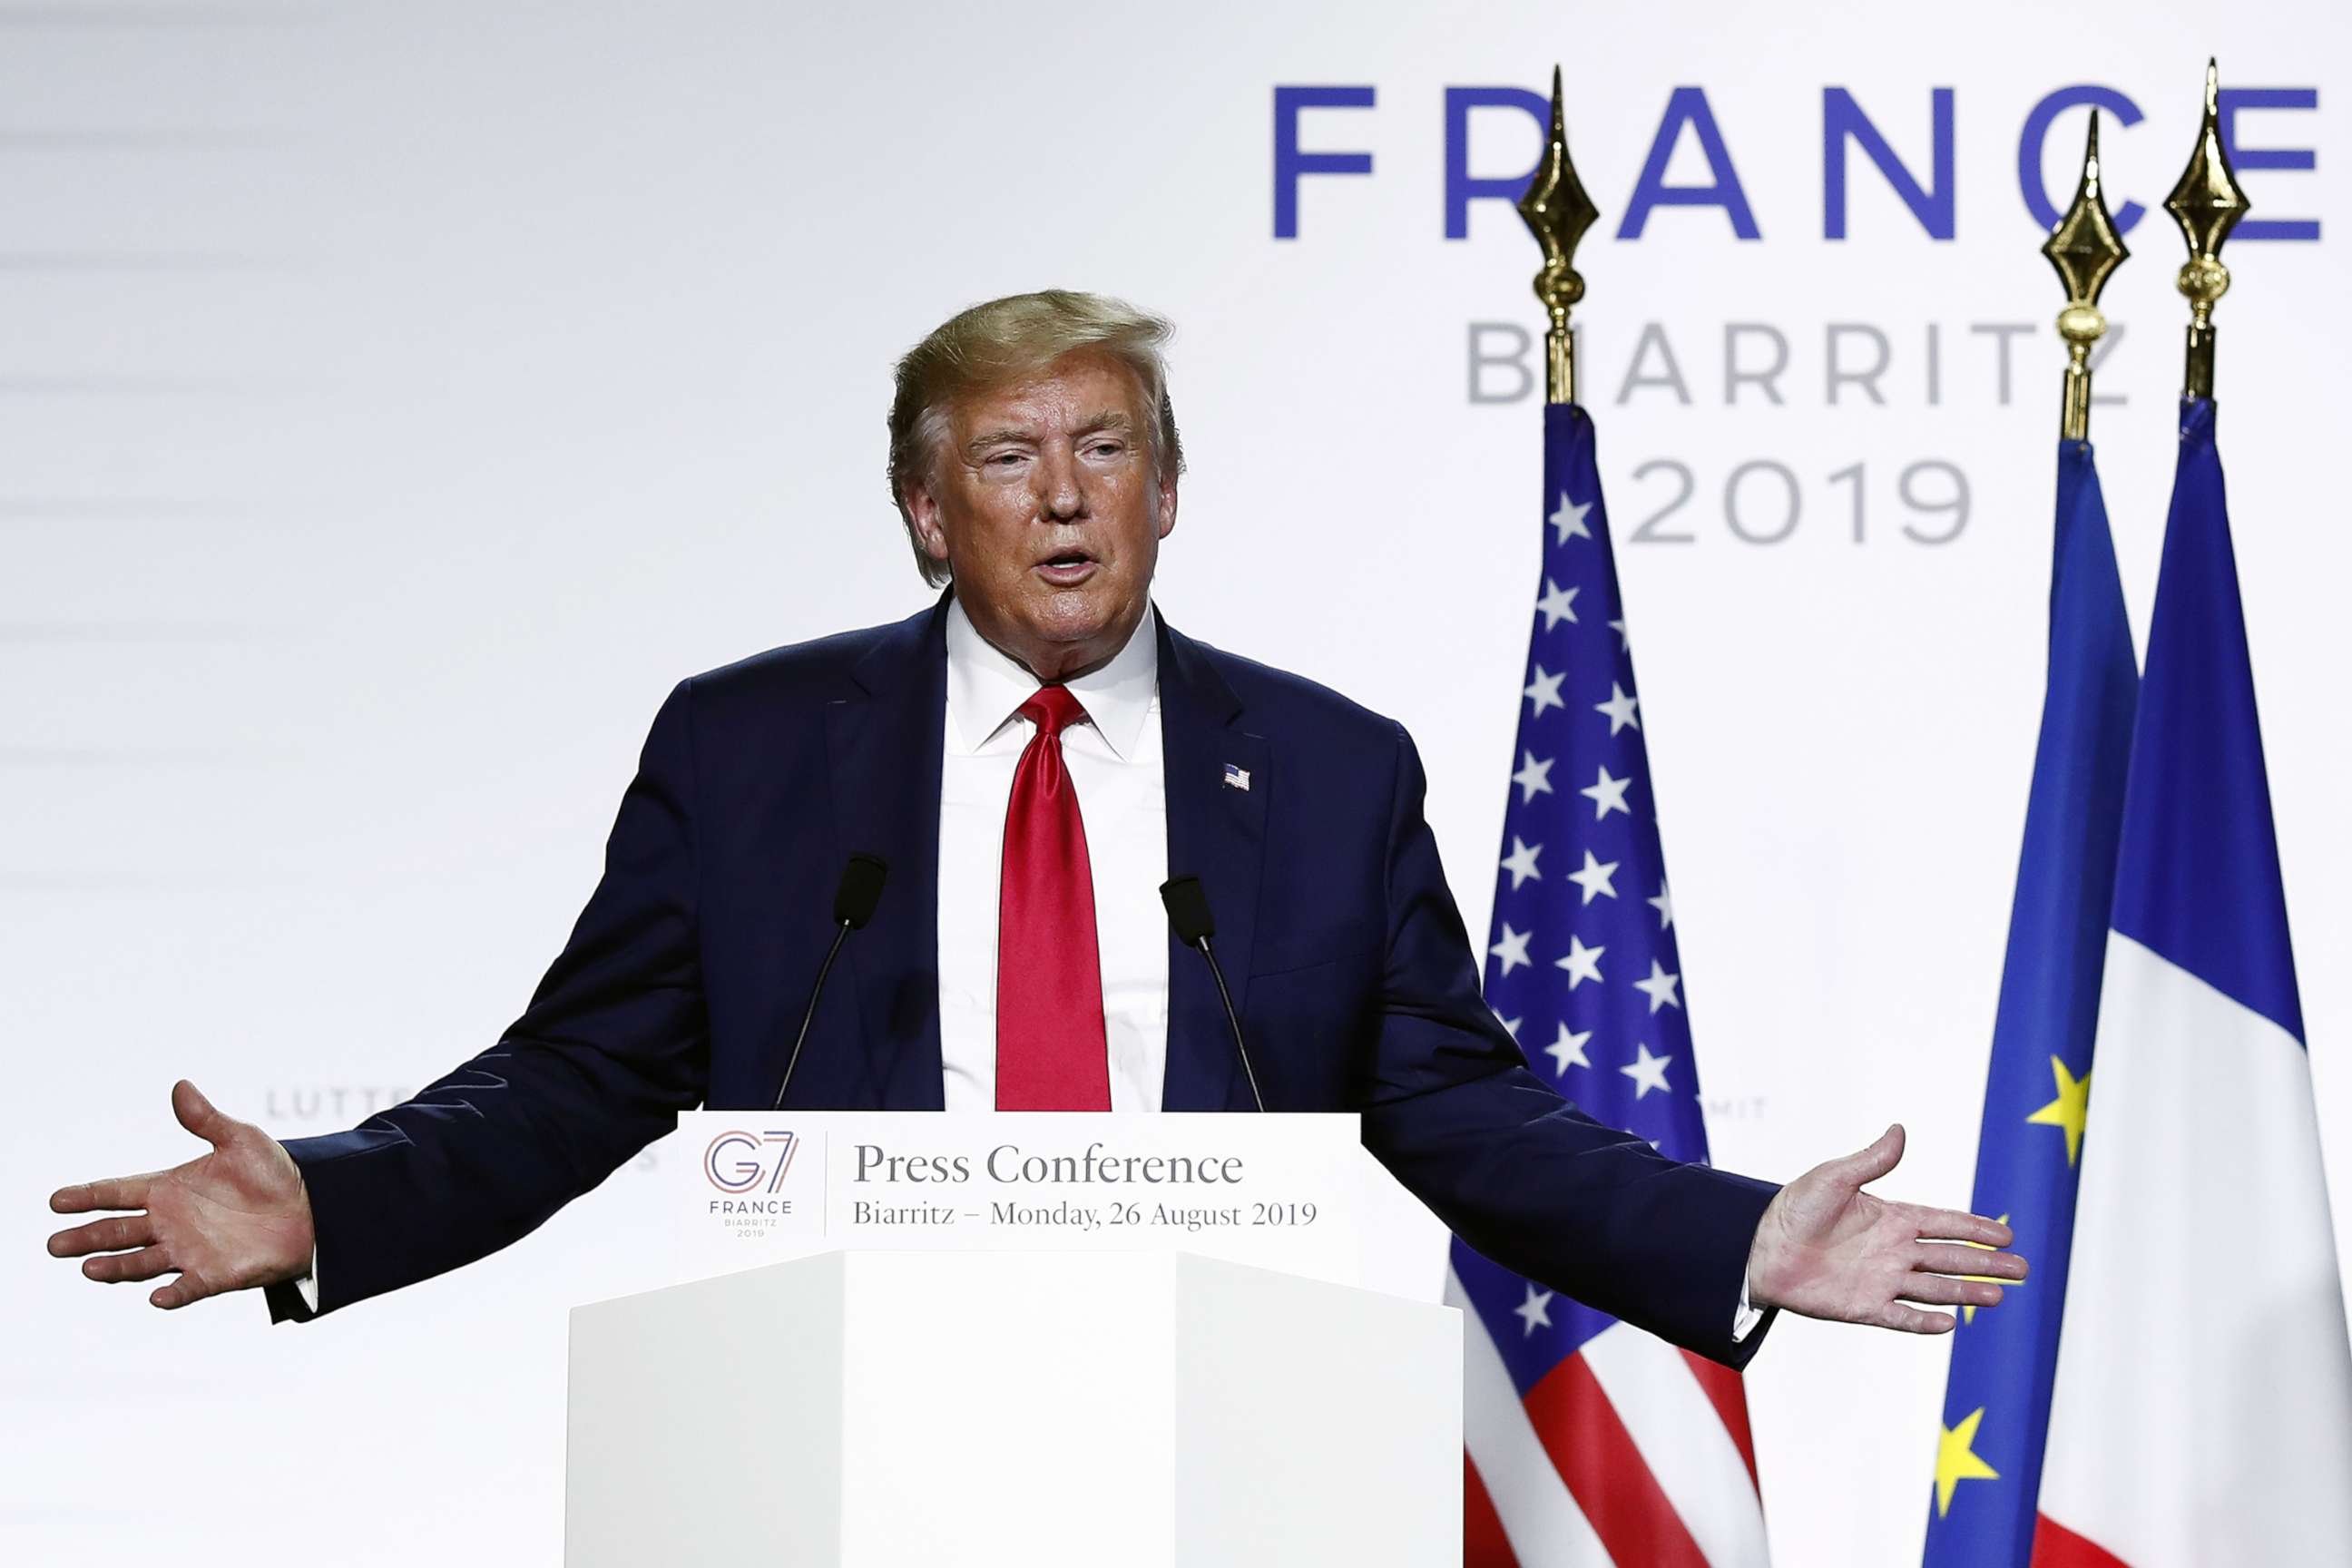 PHOTO: President Donald J. Trump speaks during a press conference on the closing day of the G7 summit in Biarritz, France, August 26, 2019.